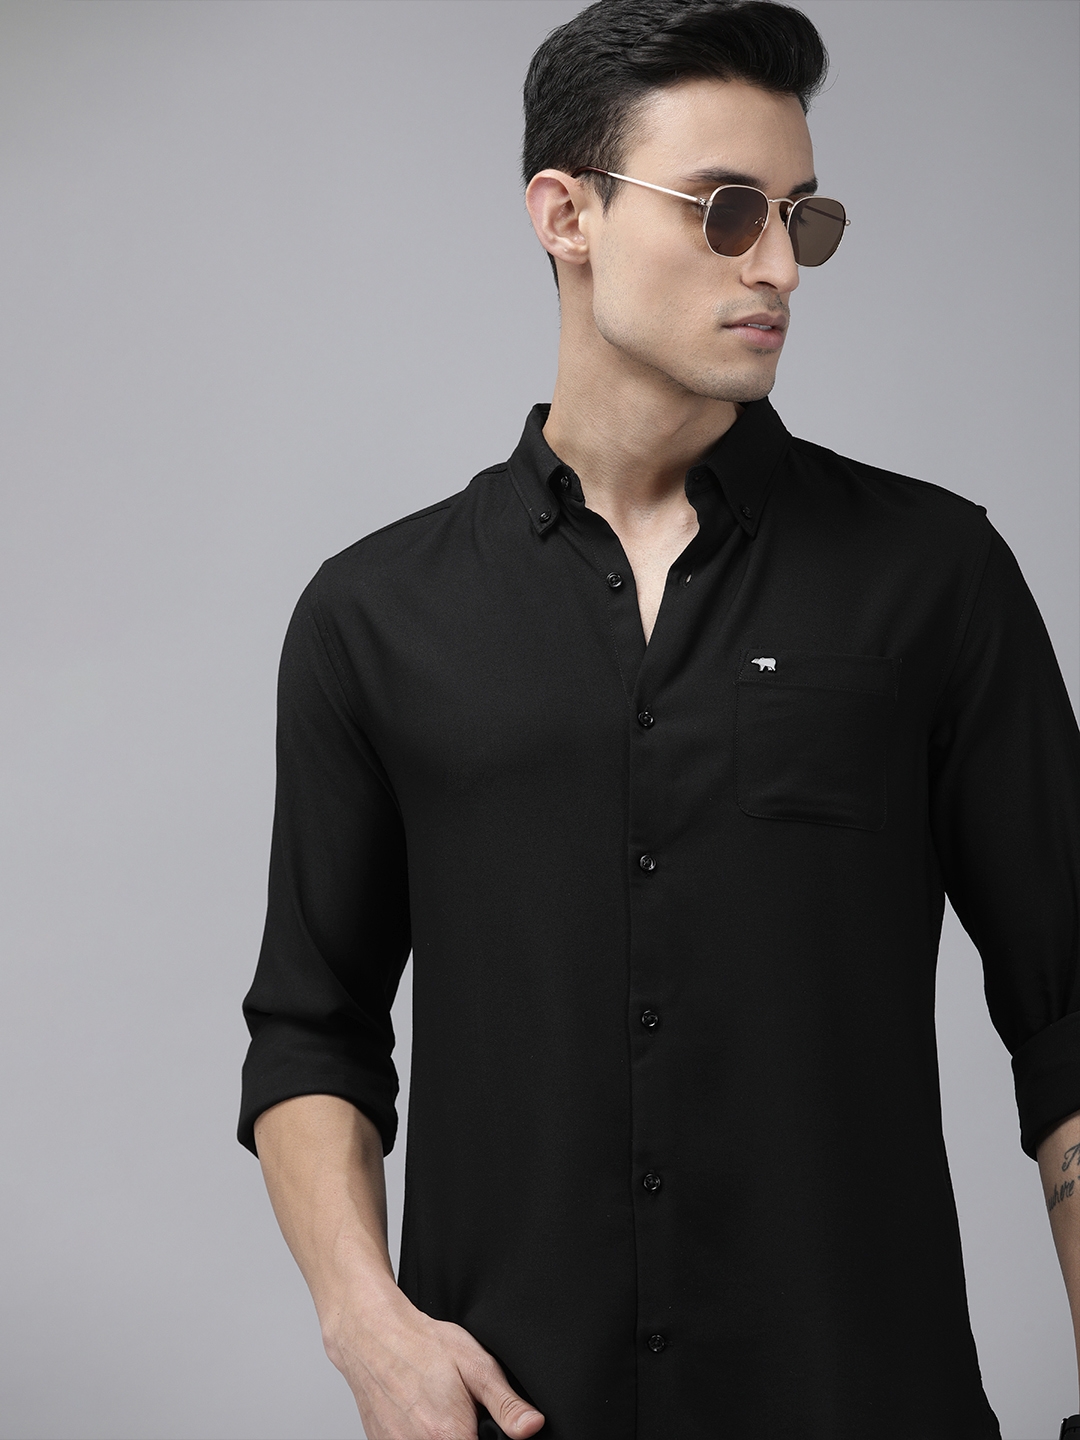 The Bear House | The Bear House Men Black Slim Fit Solid Rayon Lycra Casual Shirt